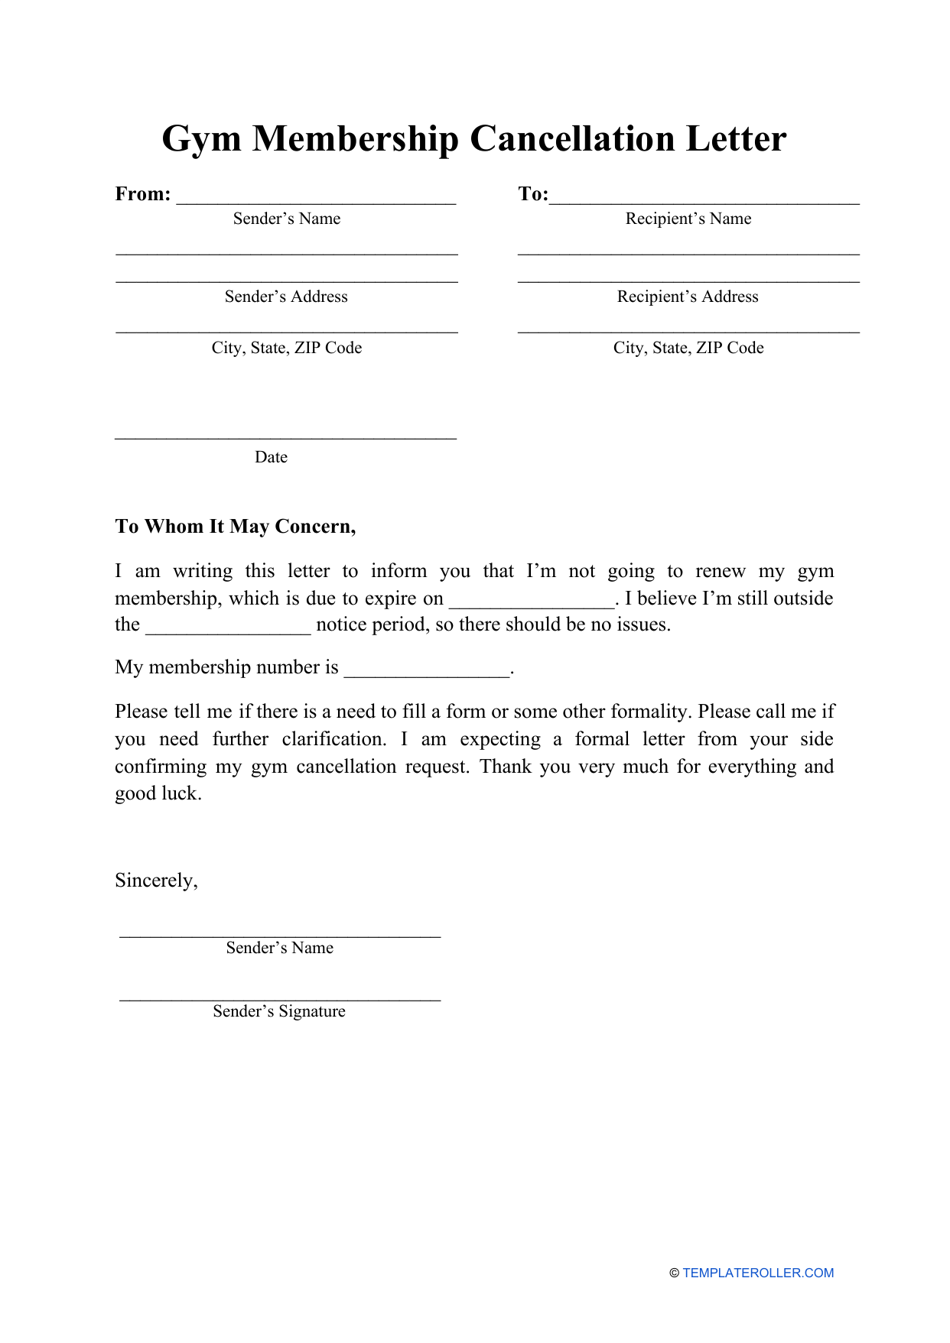 gym-membership-cancellation-letter-template-download-printable-pdf